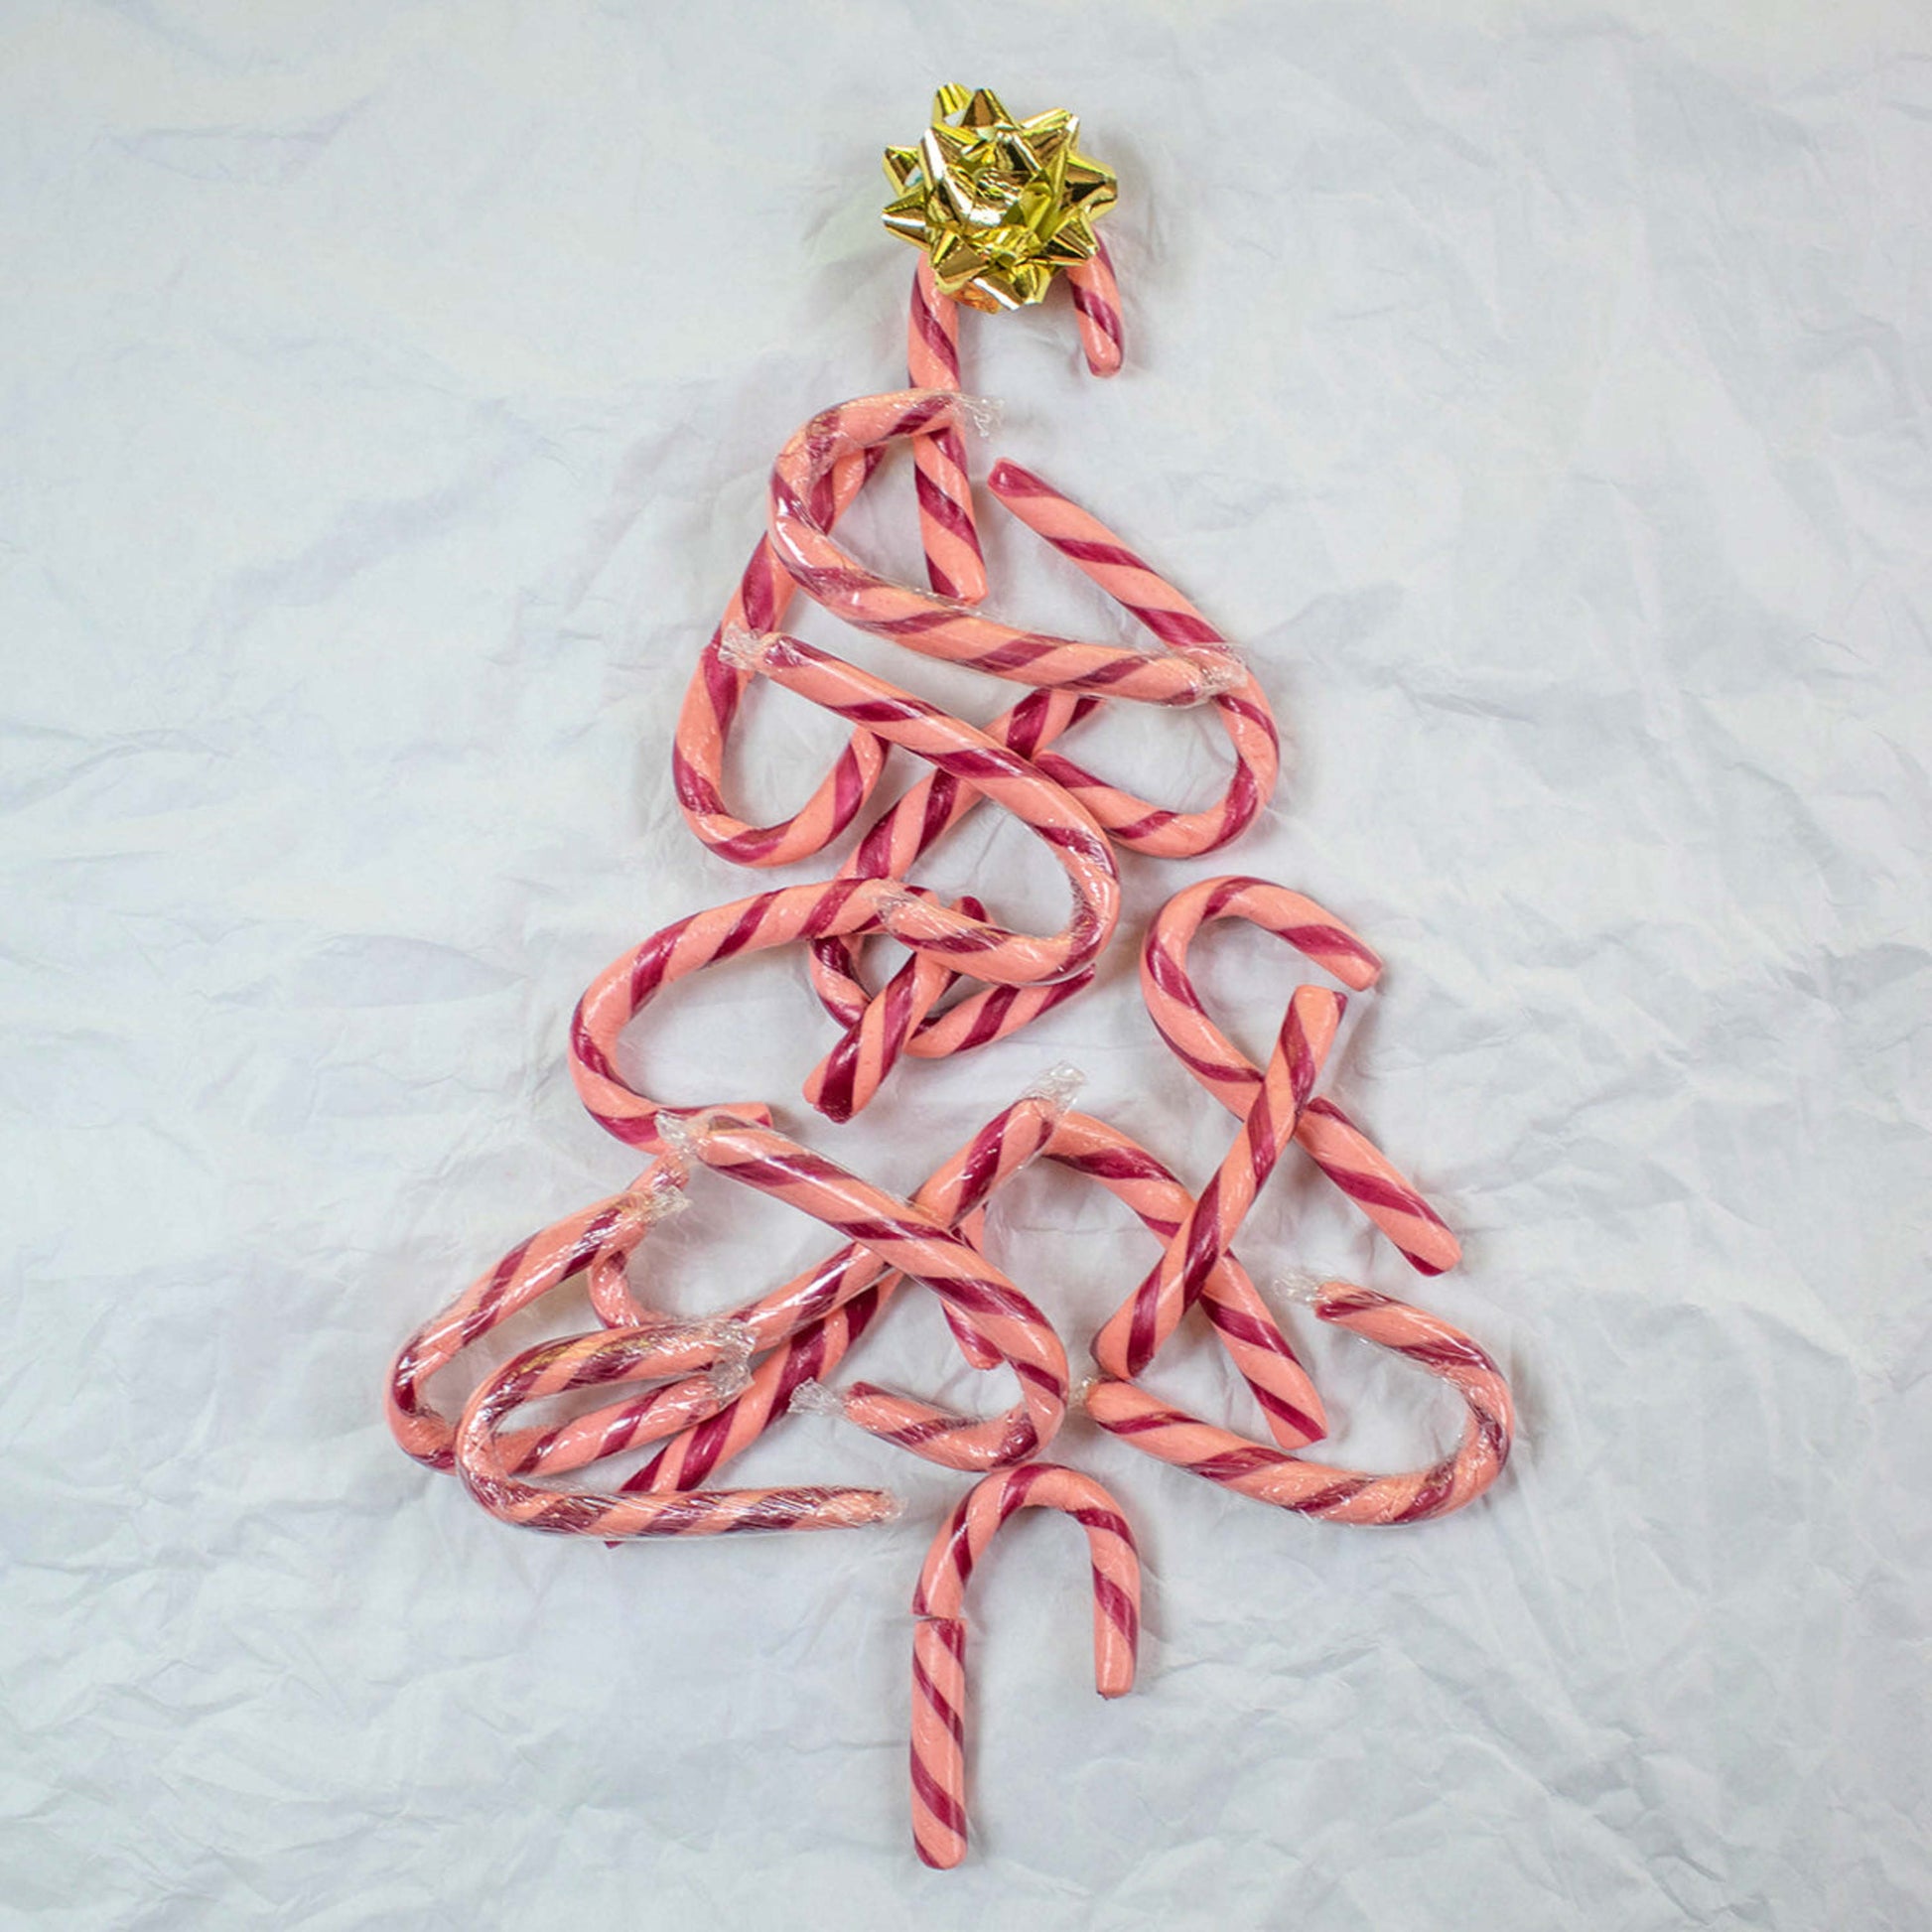 Torie & Howard Organic Mini Candy Canes in the shape of a Christmas tree